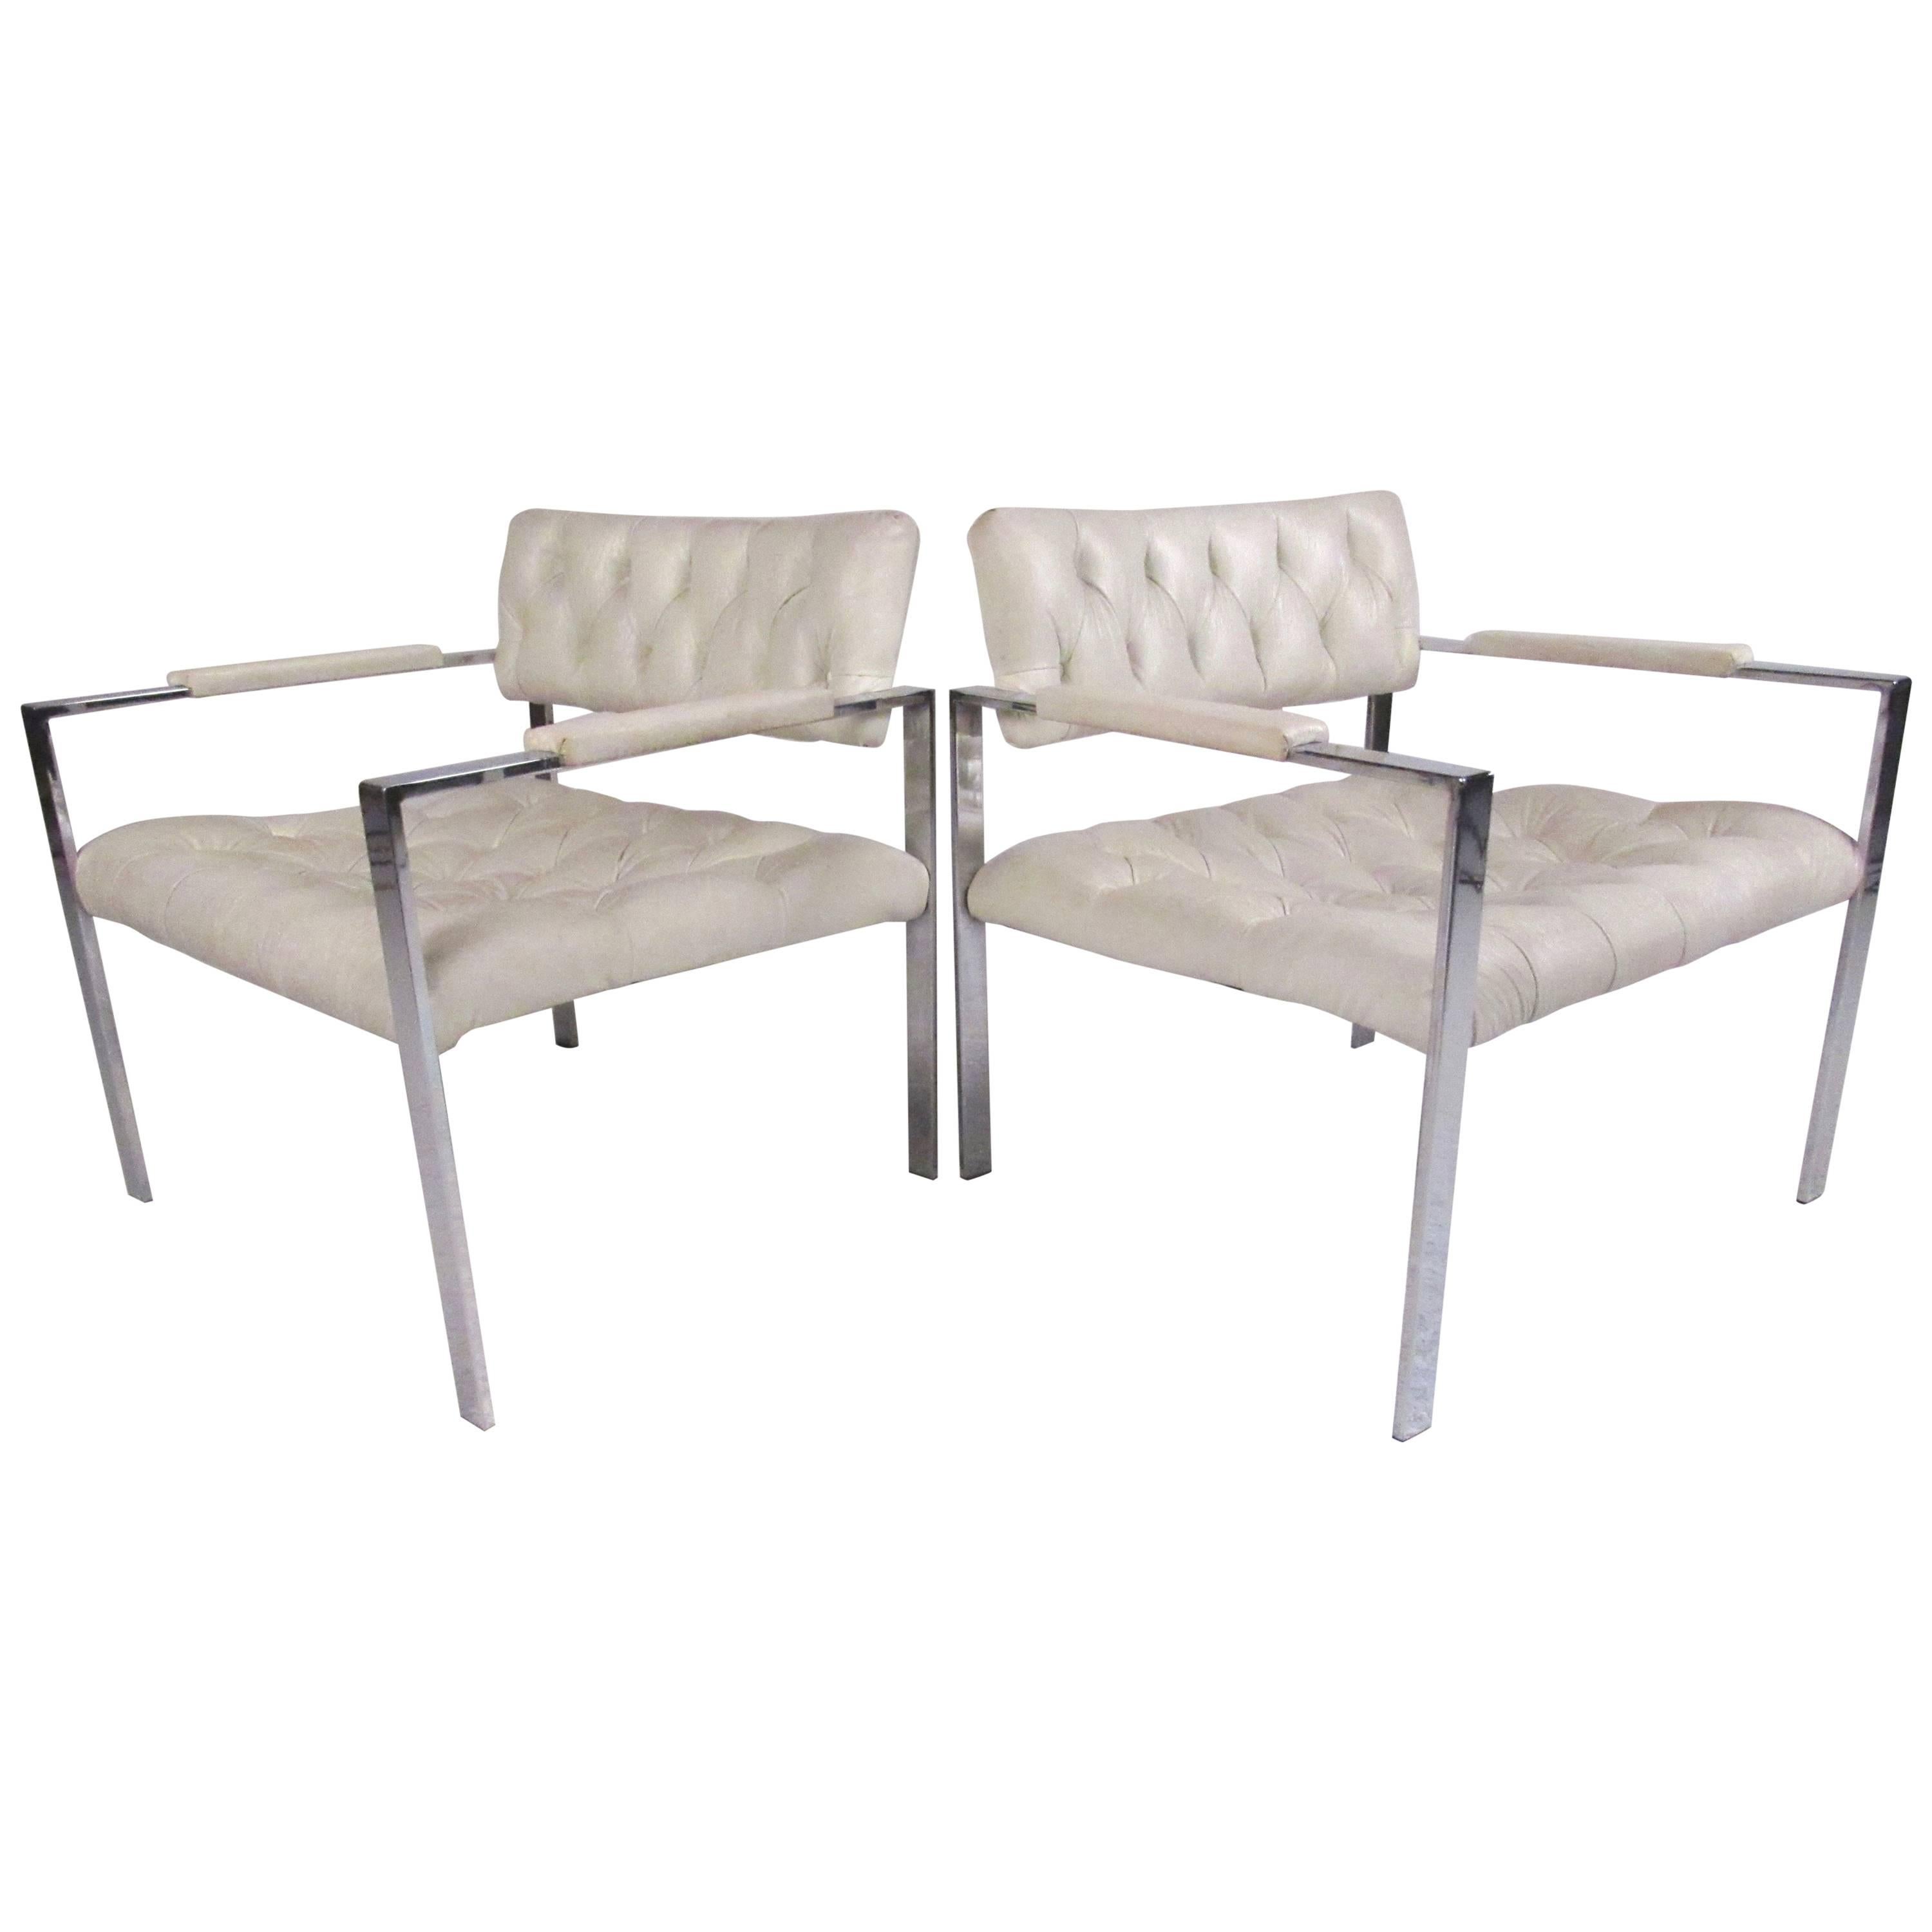 Pair of Chrome Lounge Chairs by Erwin-Lambeth in the style of Harvey Probber